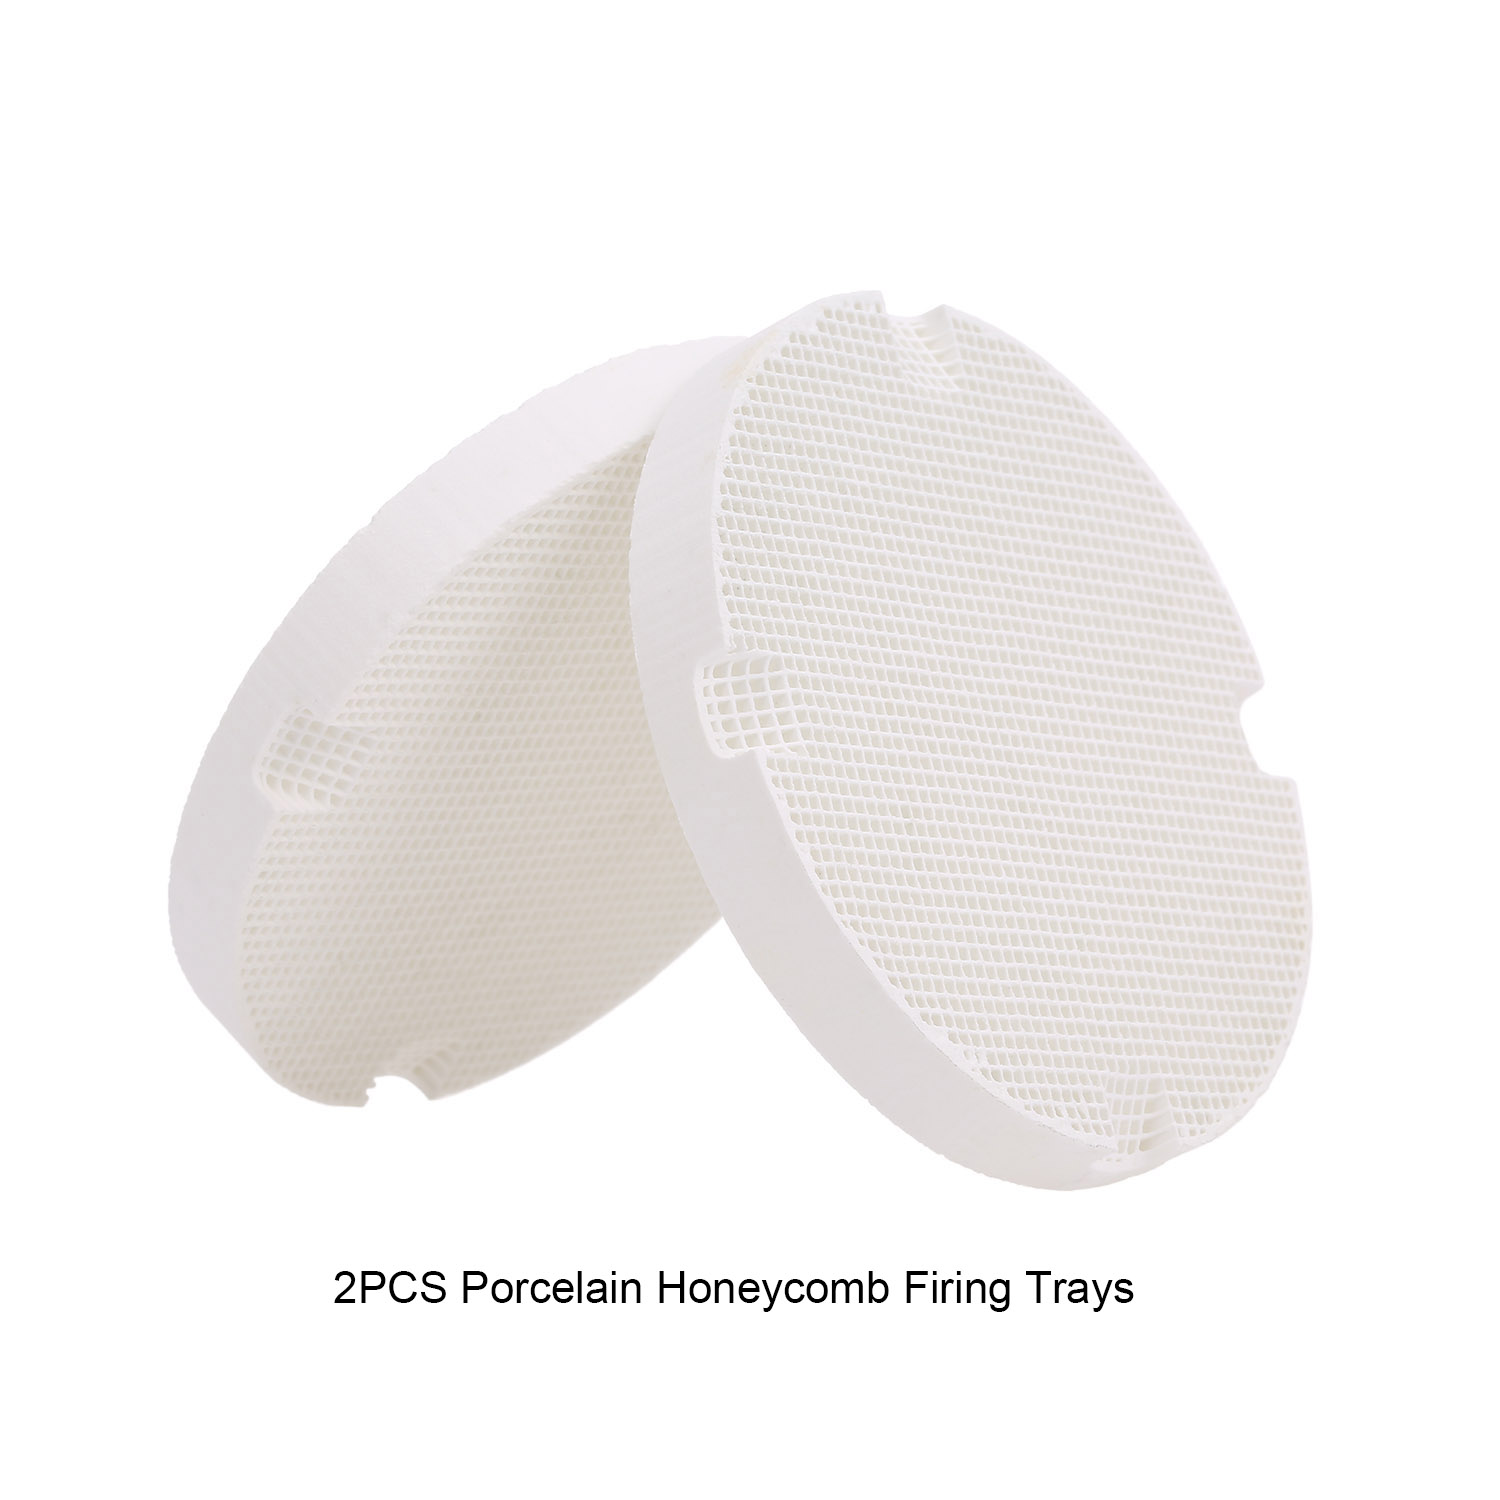 2 tray Dental Lab Honeycomb Round Firing porcelain Trays with 20pcs Metal Pins Dental Technician Supplies